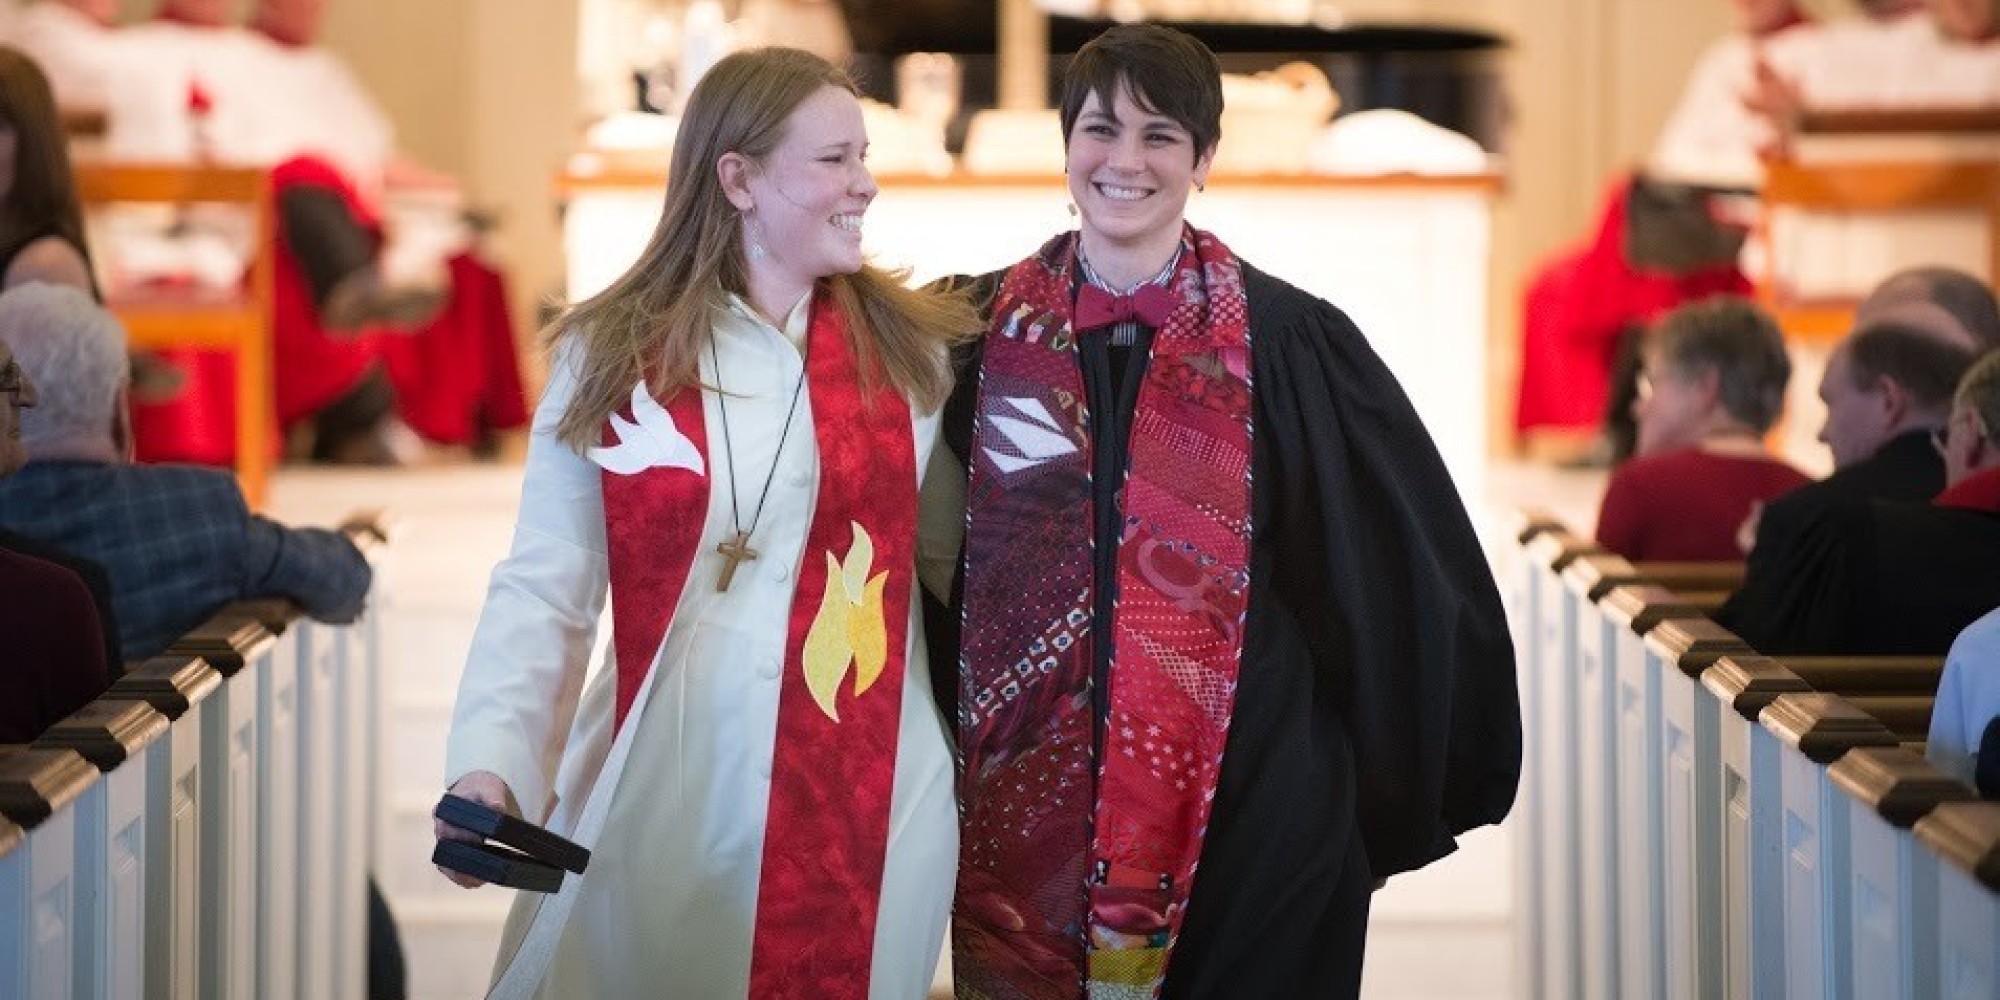 The Jointly Ordained Lesbian Couple Making History For Presbyterians 